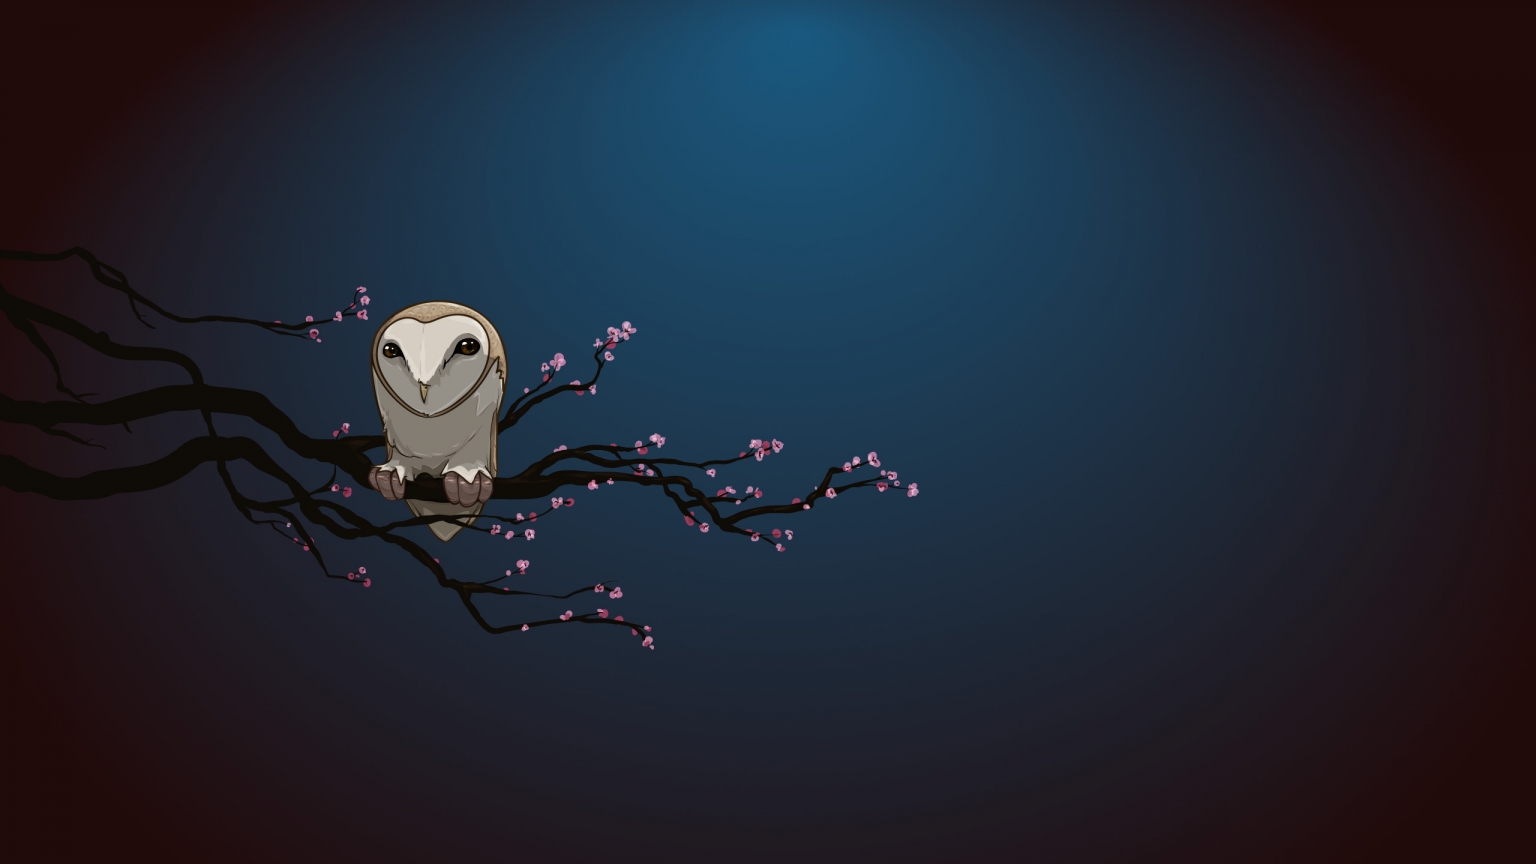 Owl Alone for 1536 x 864 HDTV resolution